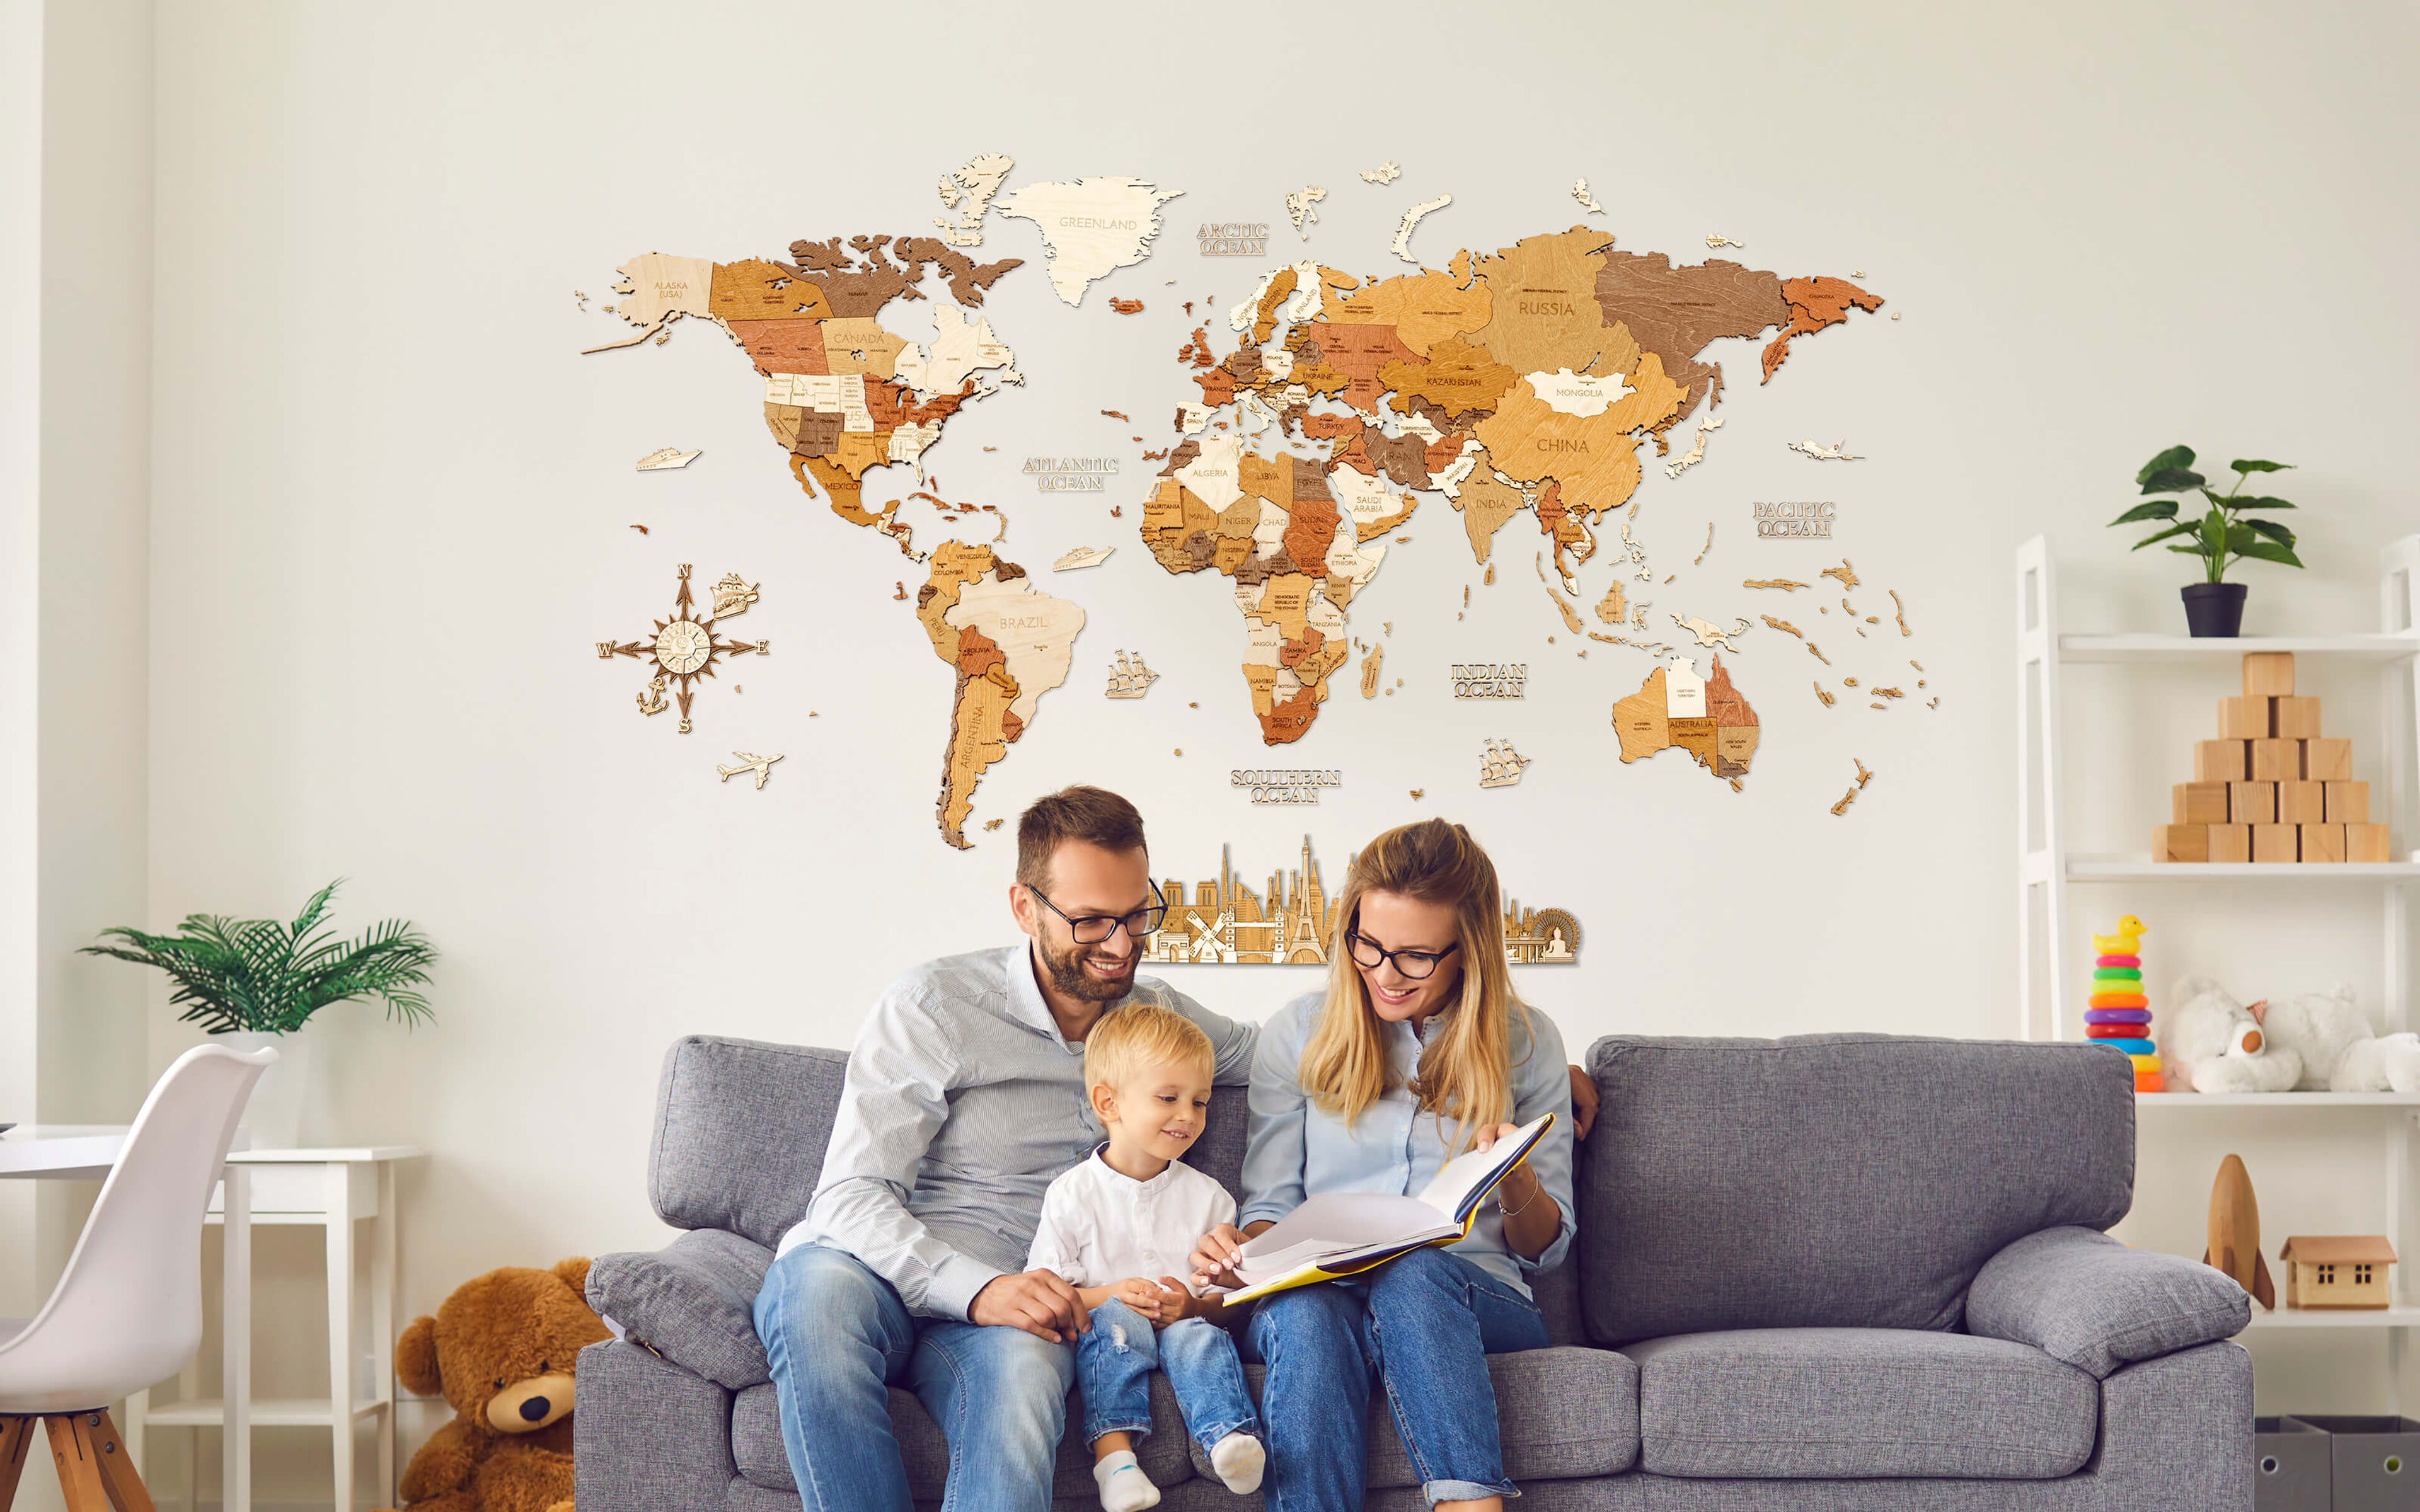 Wooden World Map Wall Decoration